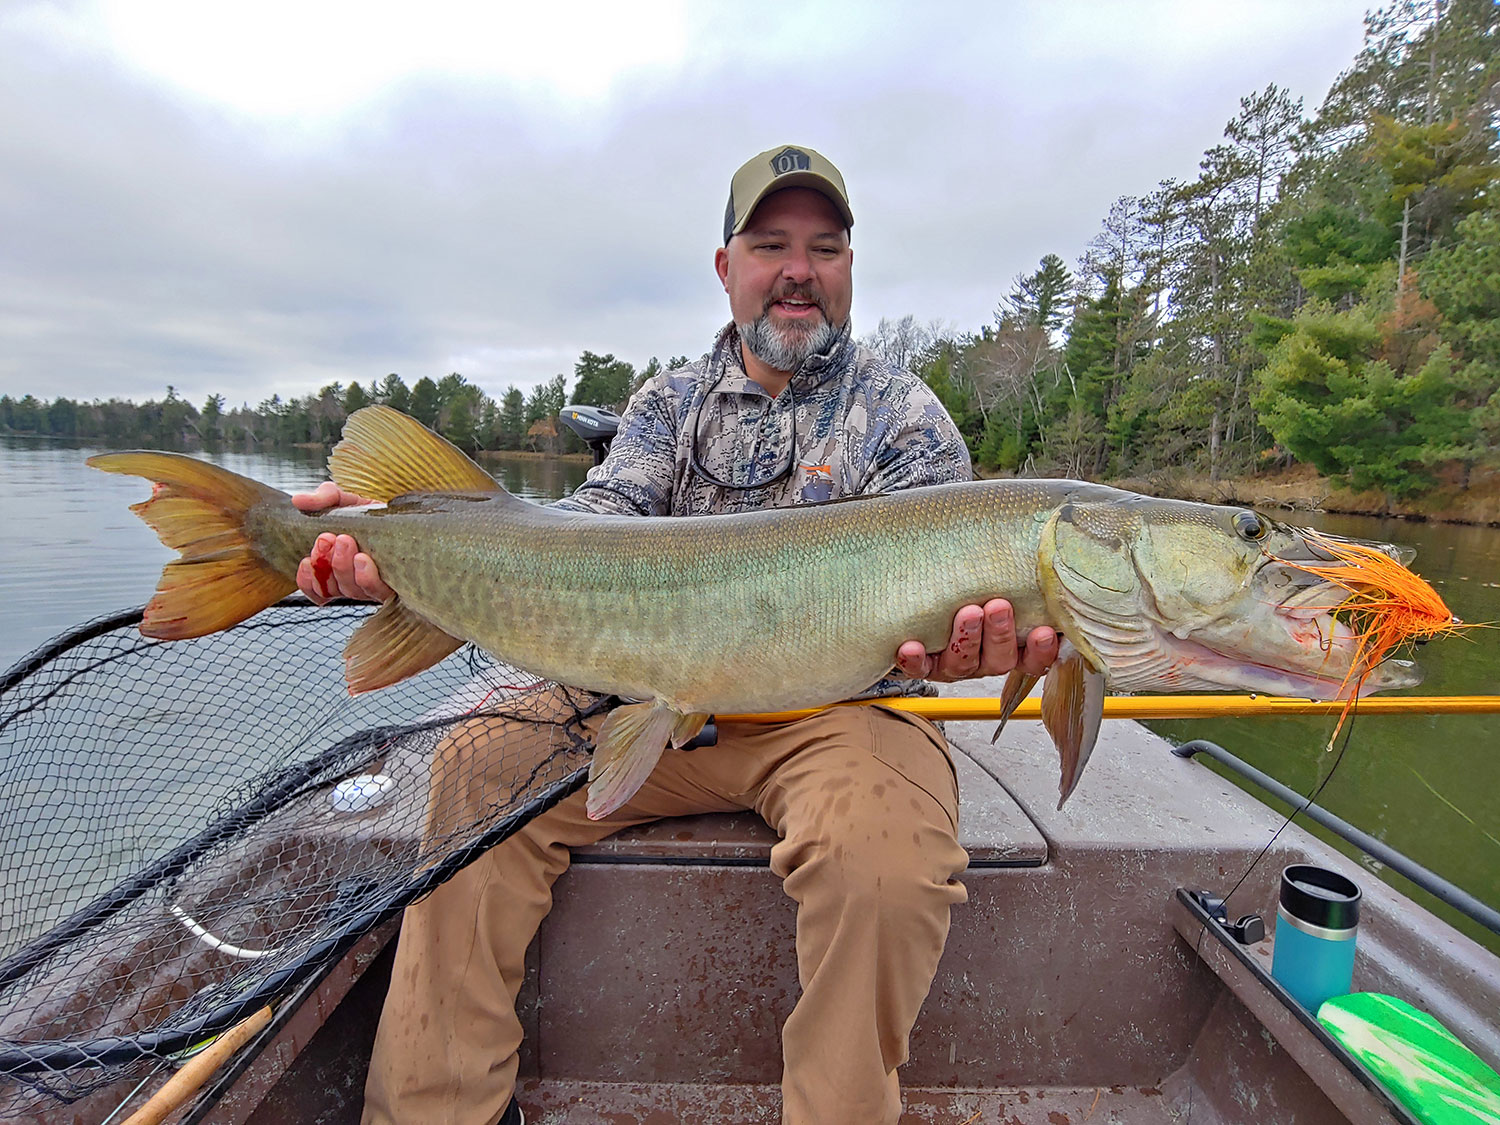 Angler holding up a large muskie